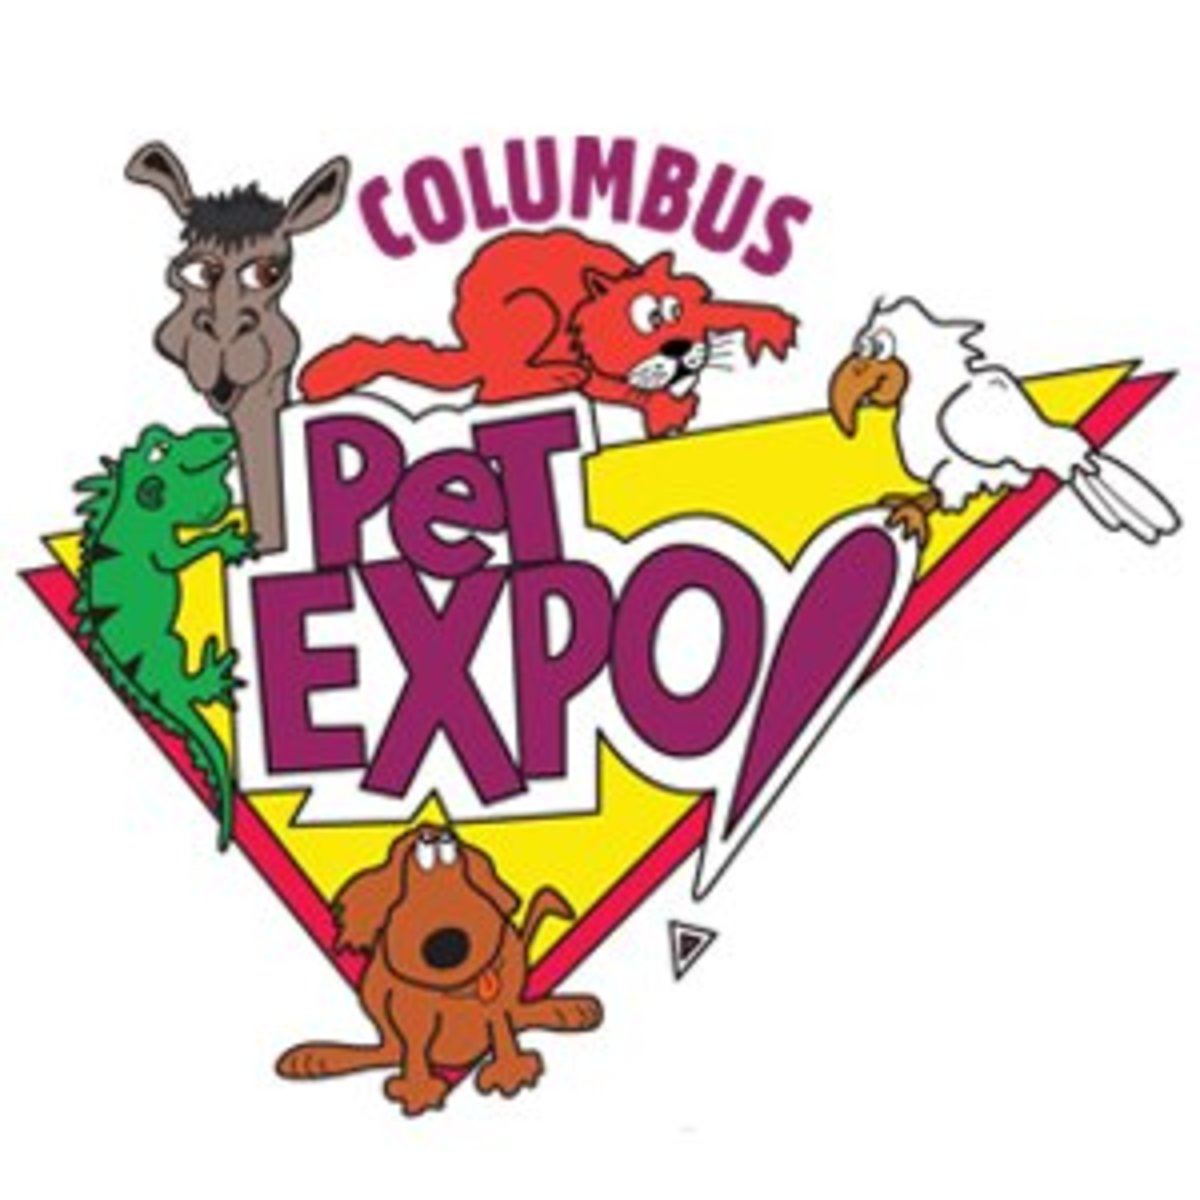 The Columbus, Ohio Annual Pet Expo: A Perfect Family Outing